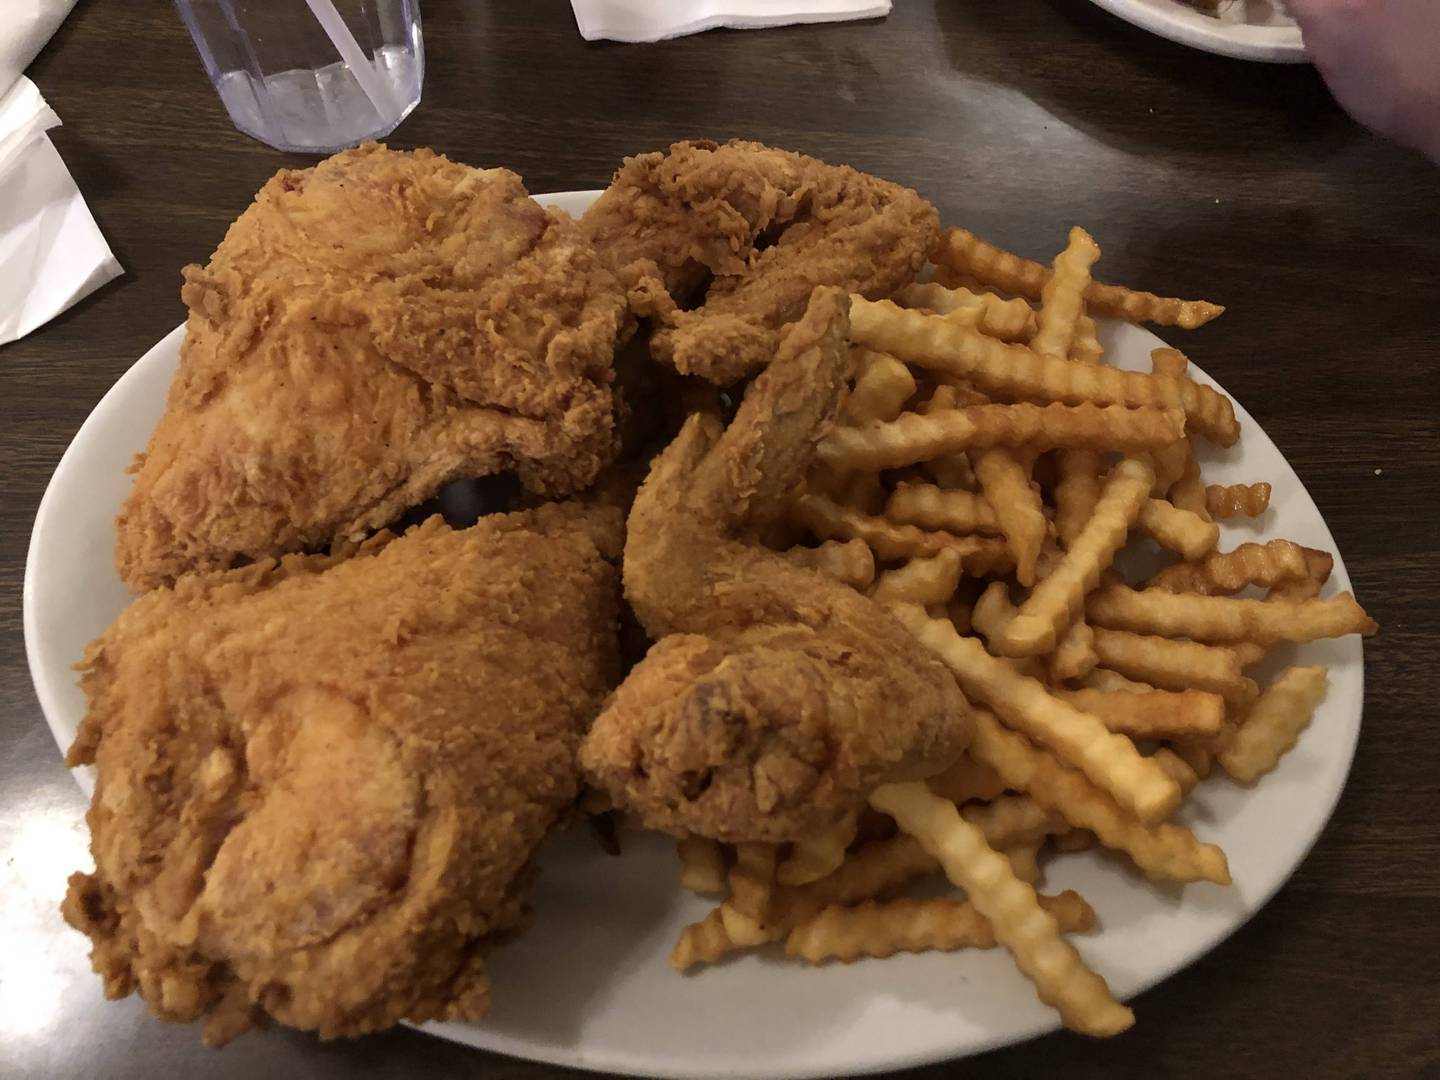 An image of the fried chicken at Joy and Ed's in Utica.